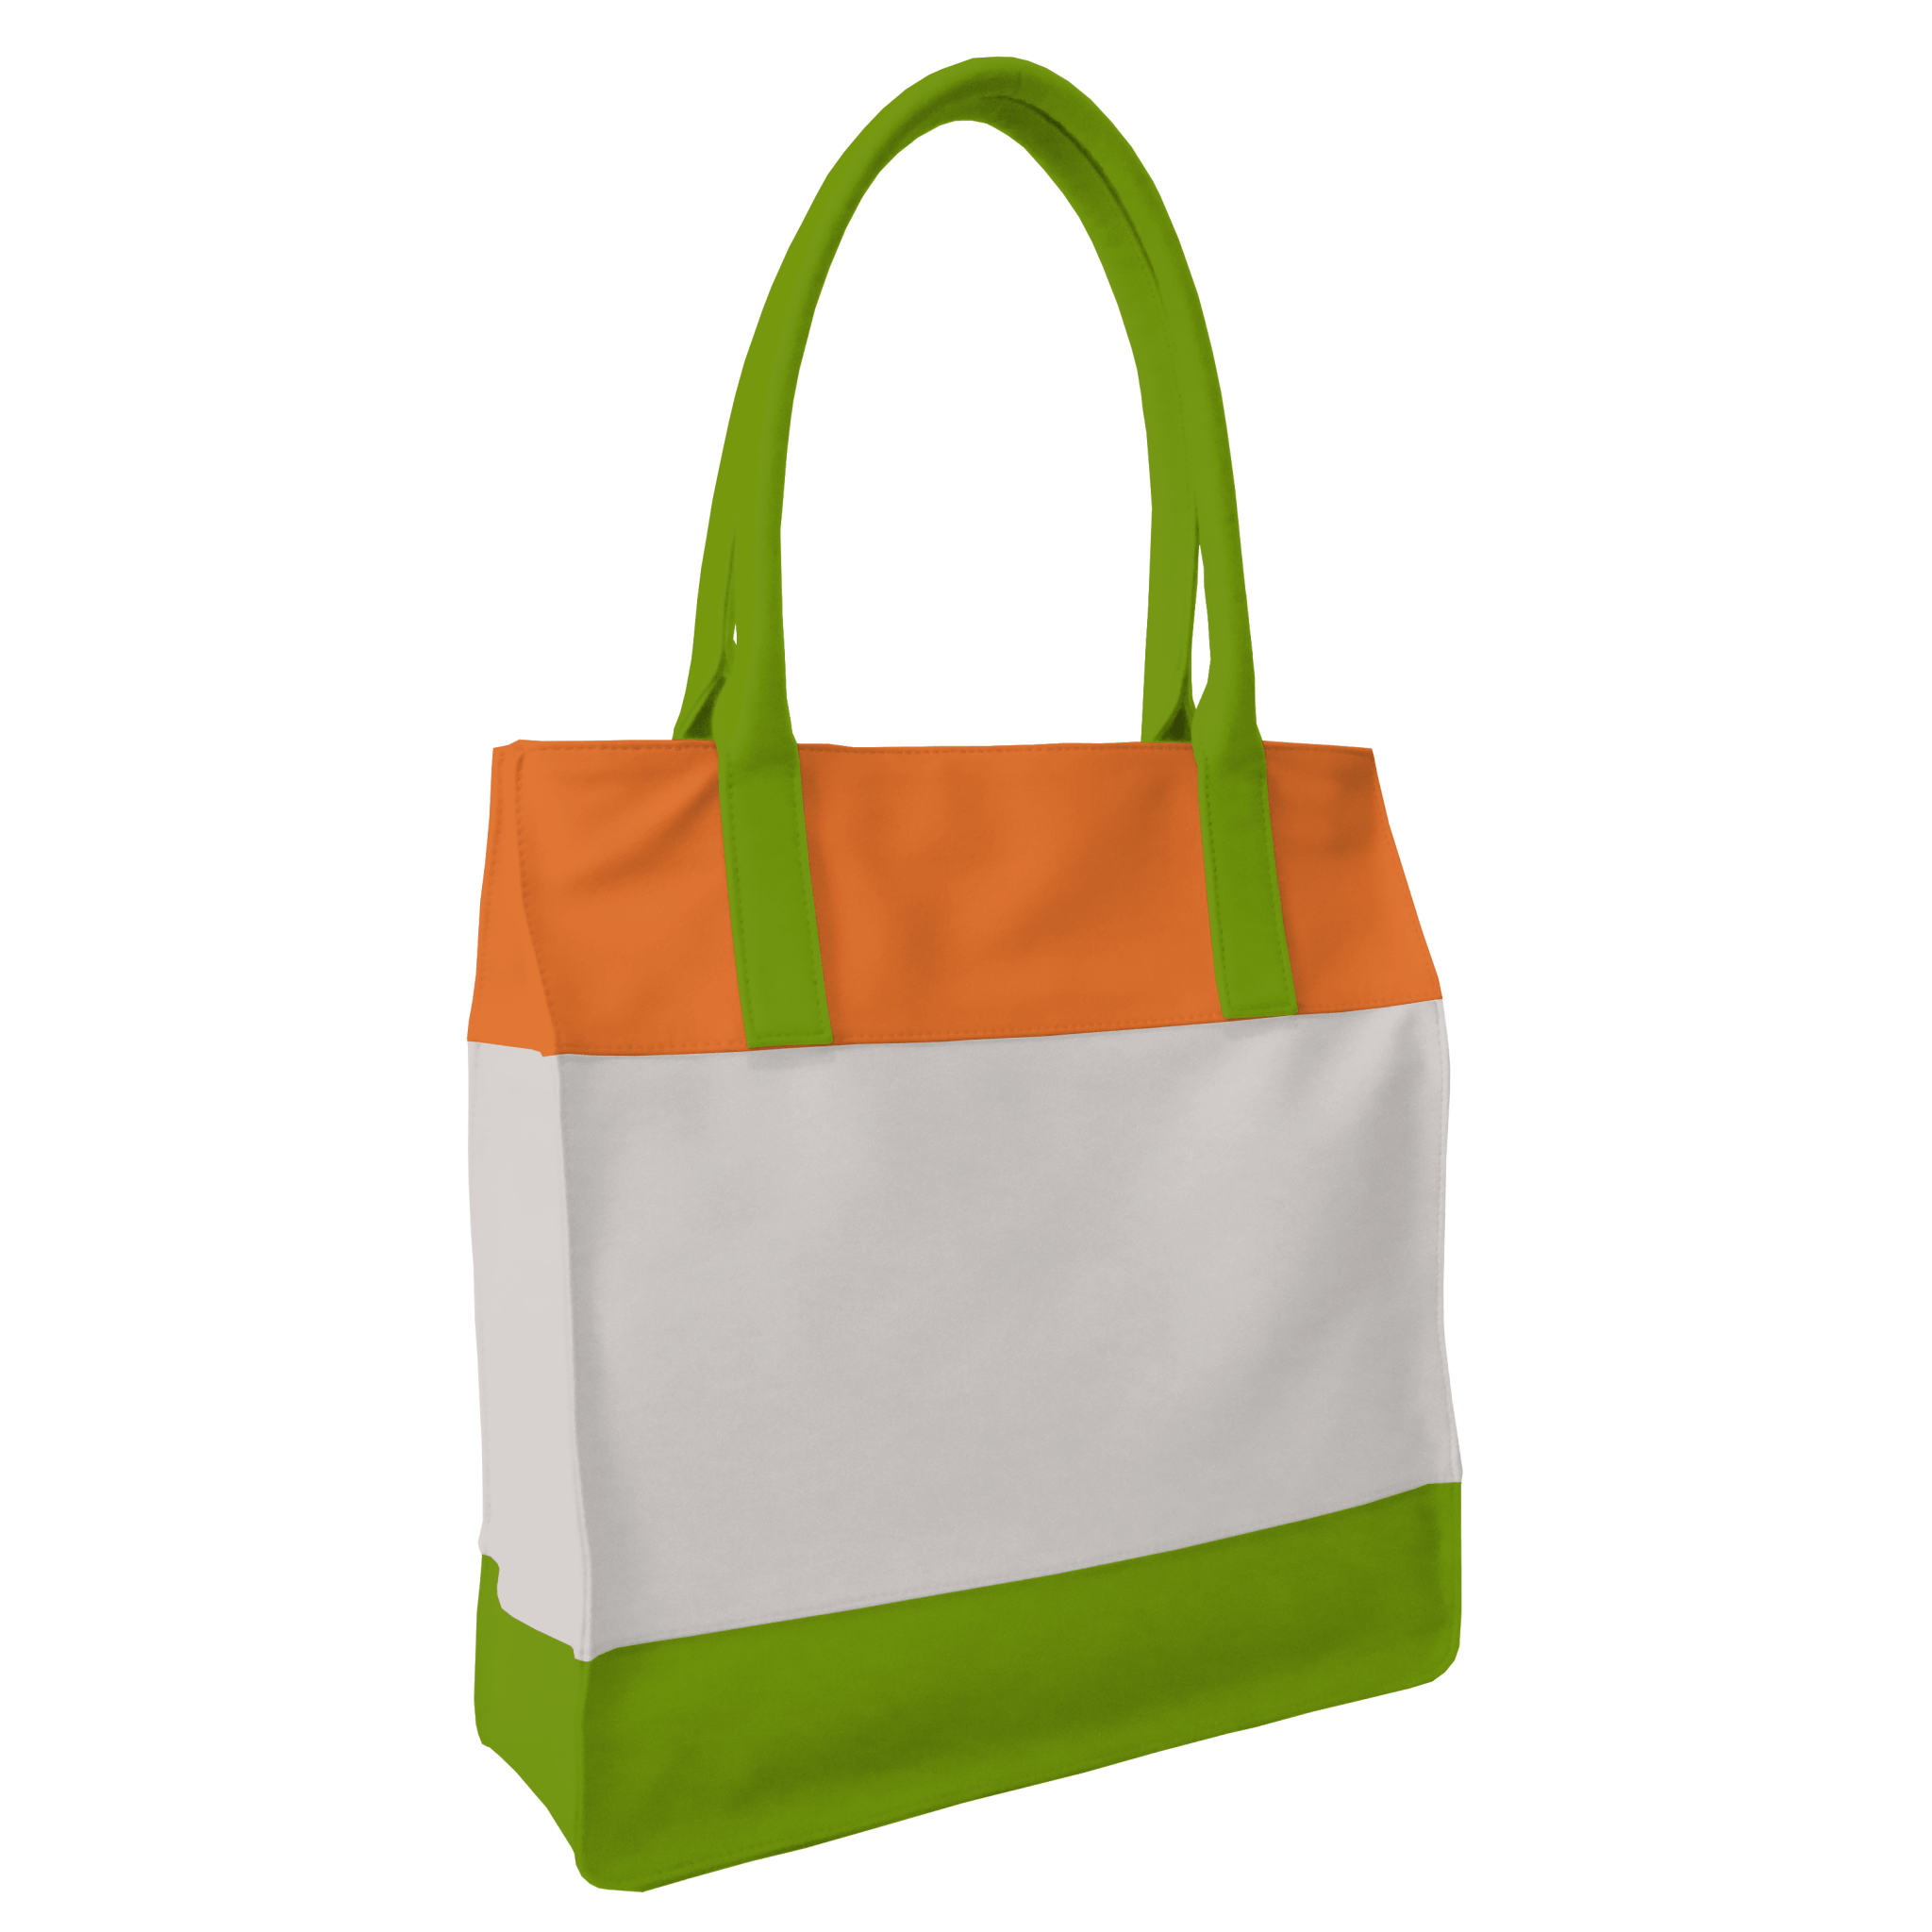 Design your own tricolour bag for Republic Day